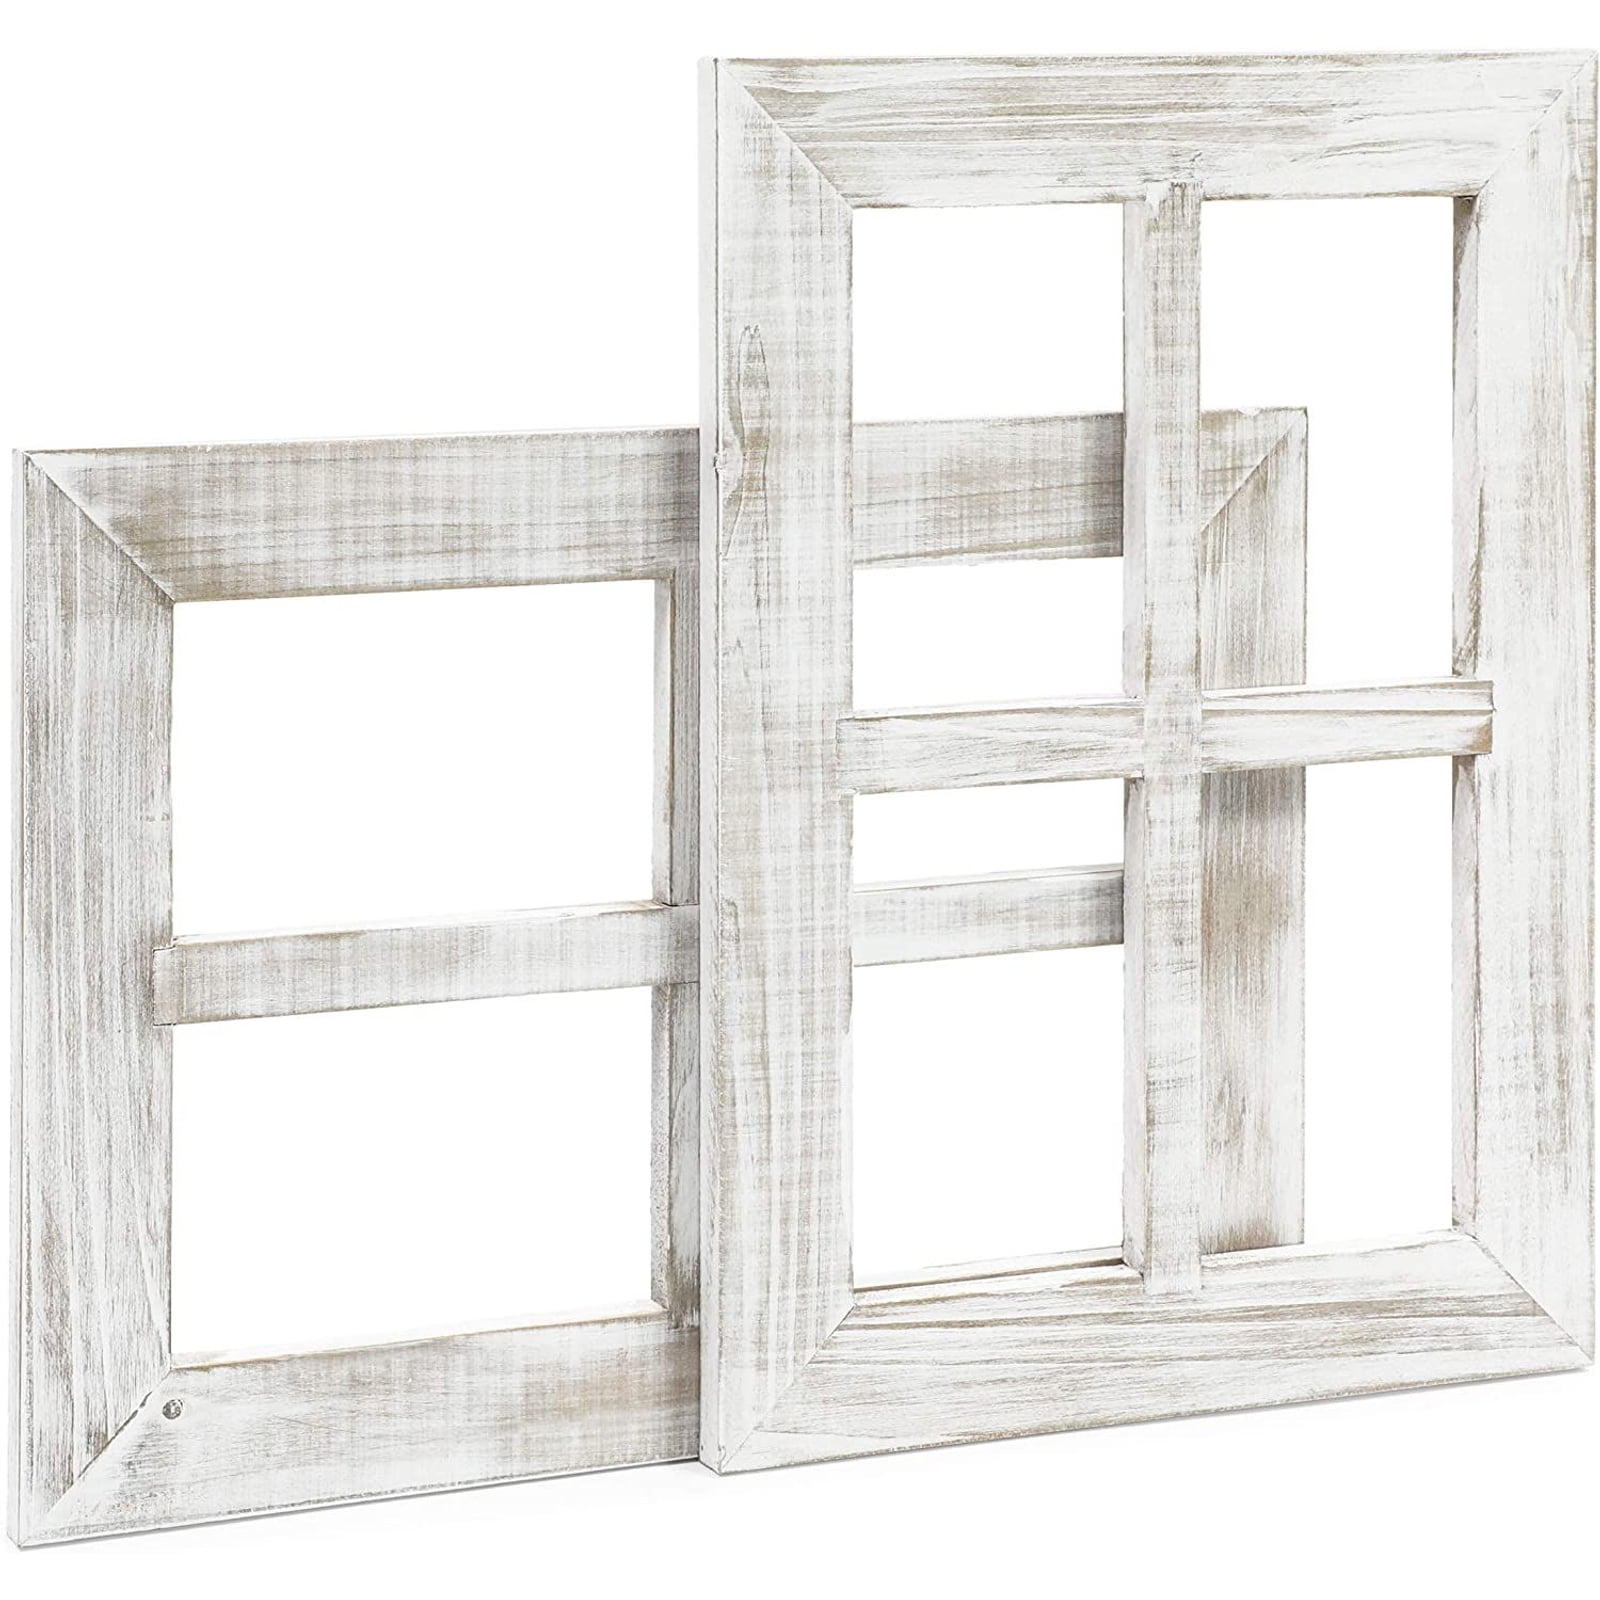 Parisloft 5X7,6 Openning Weathered Wood Windowpane Photo Frame with Metal Clips, 